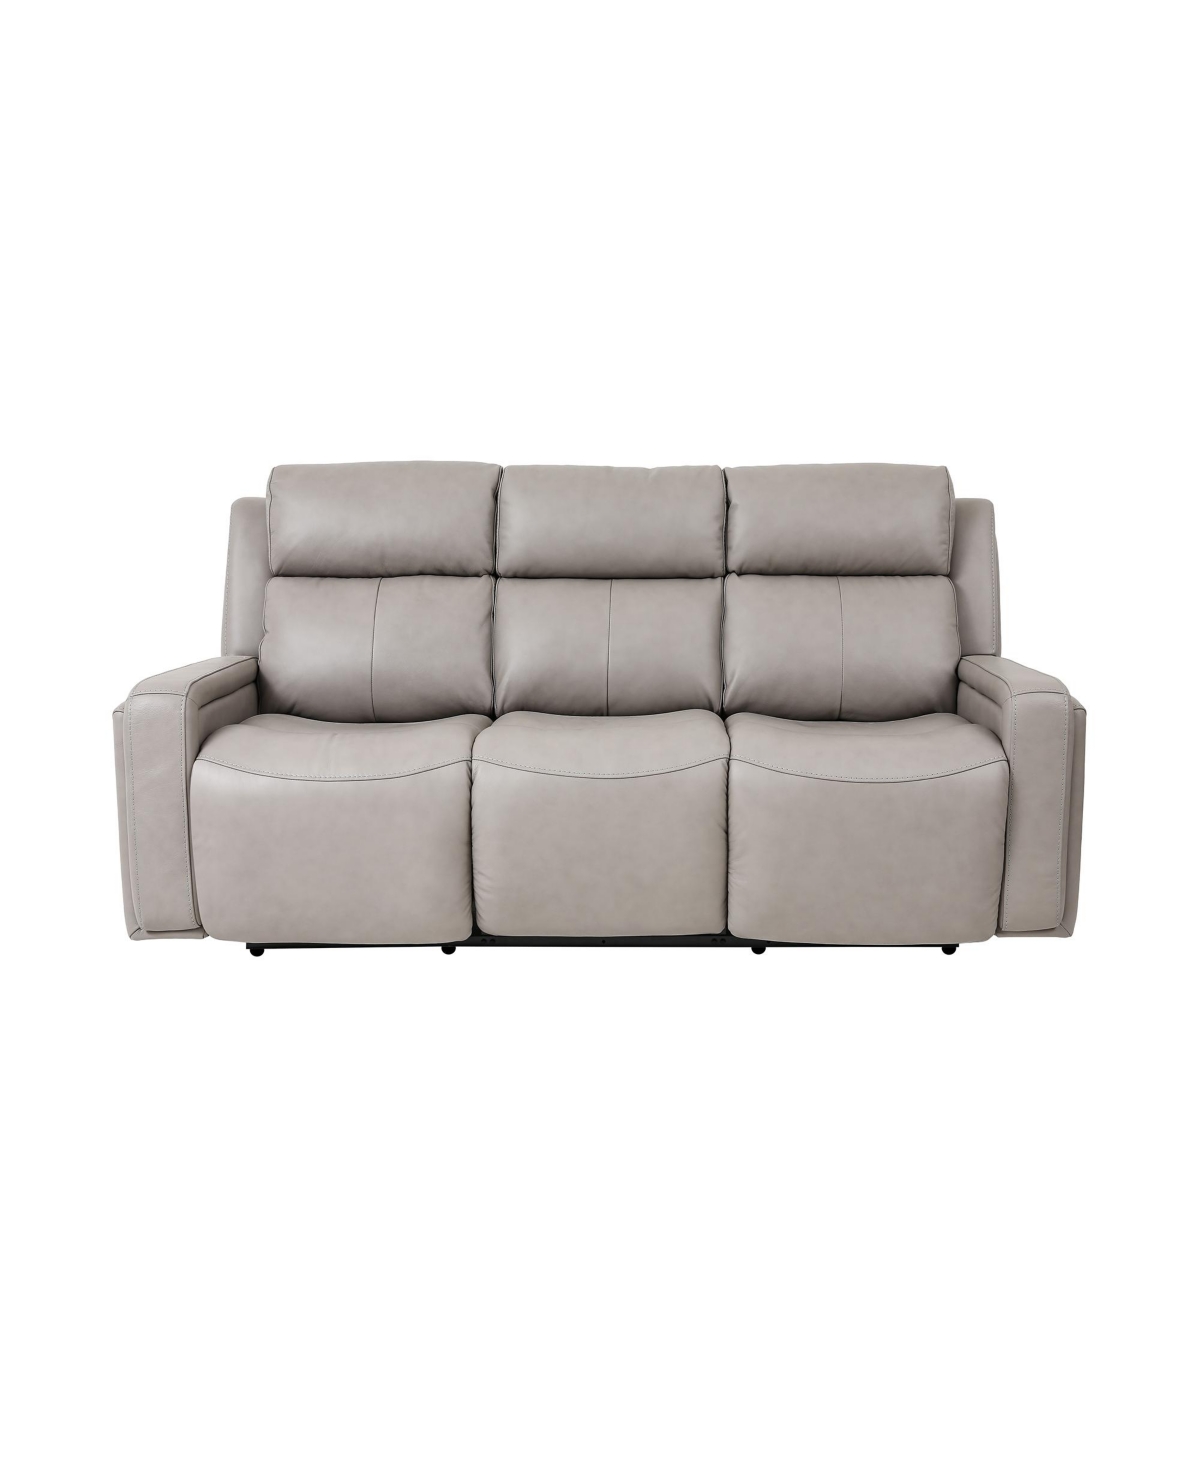 Armen Living Claude 83" Genuine Leather In Dual Power Headrest And Lumbar Support Reclining Sofa In Light Gray